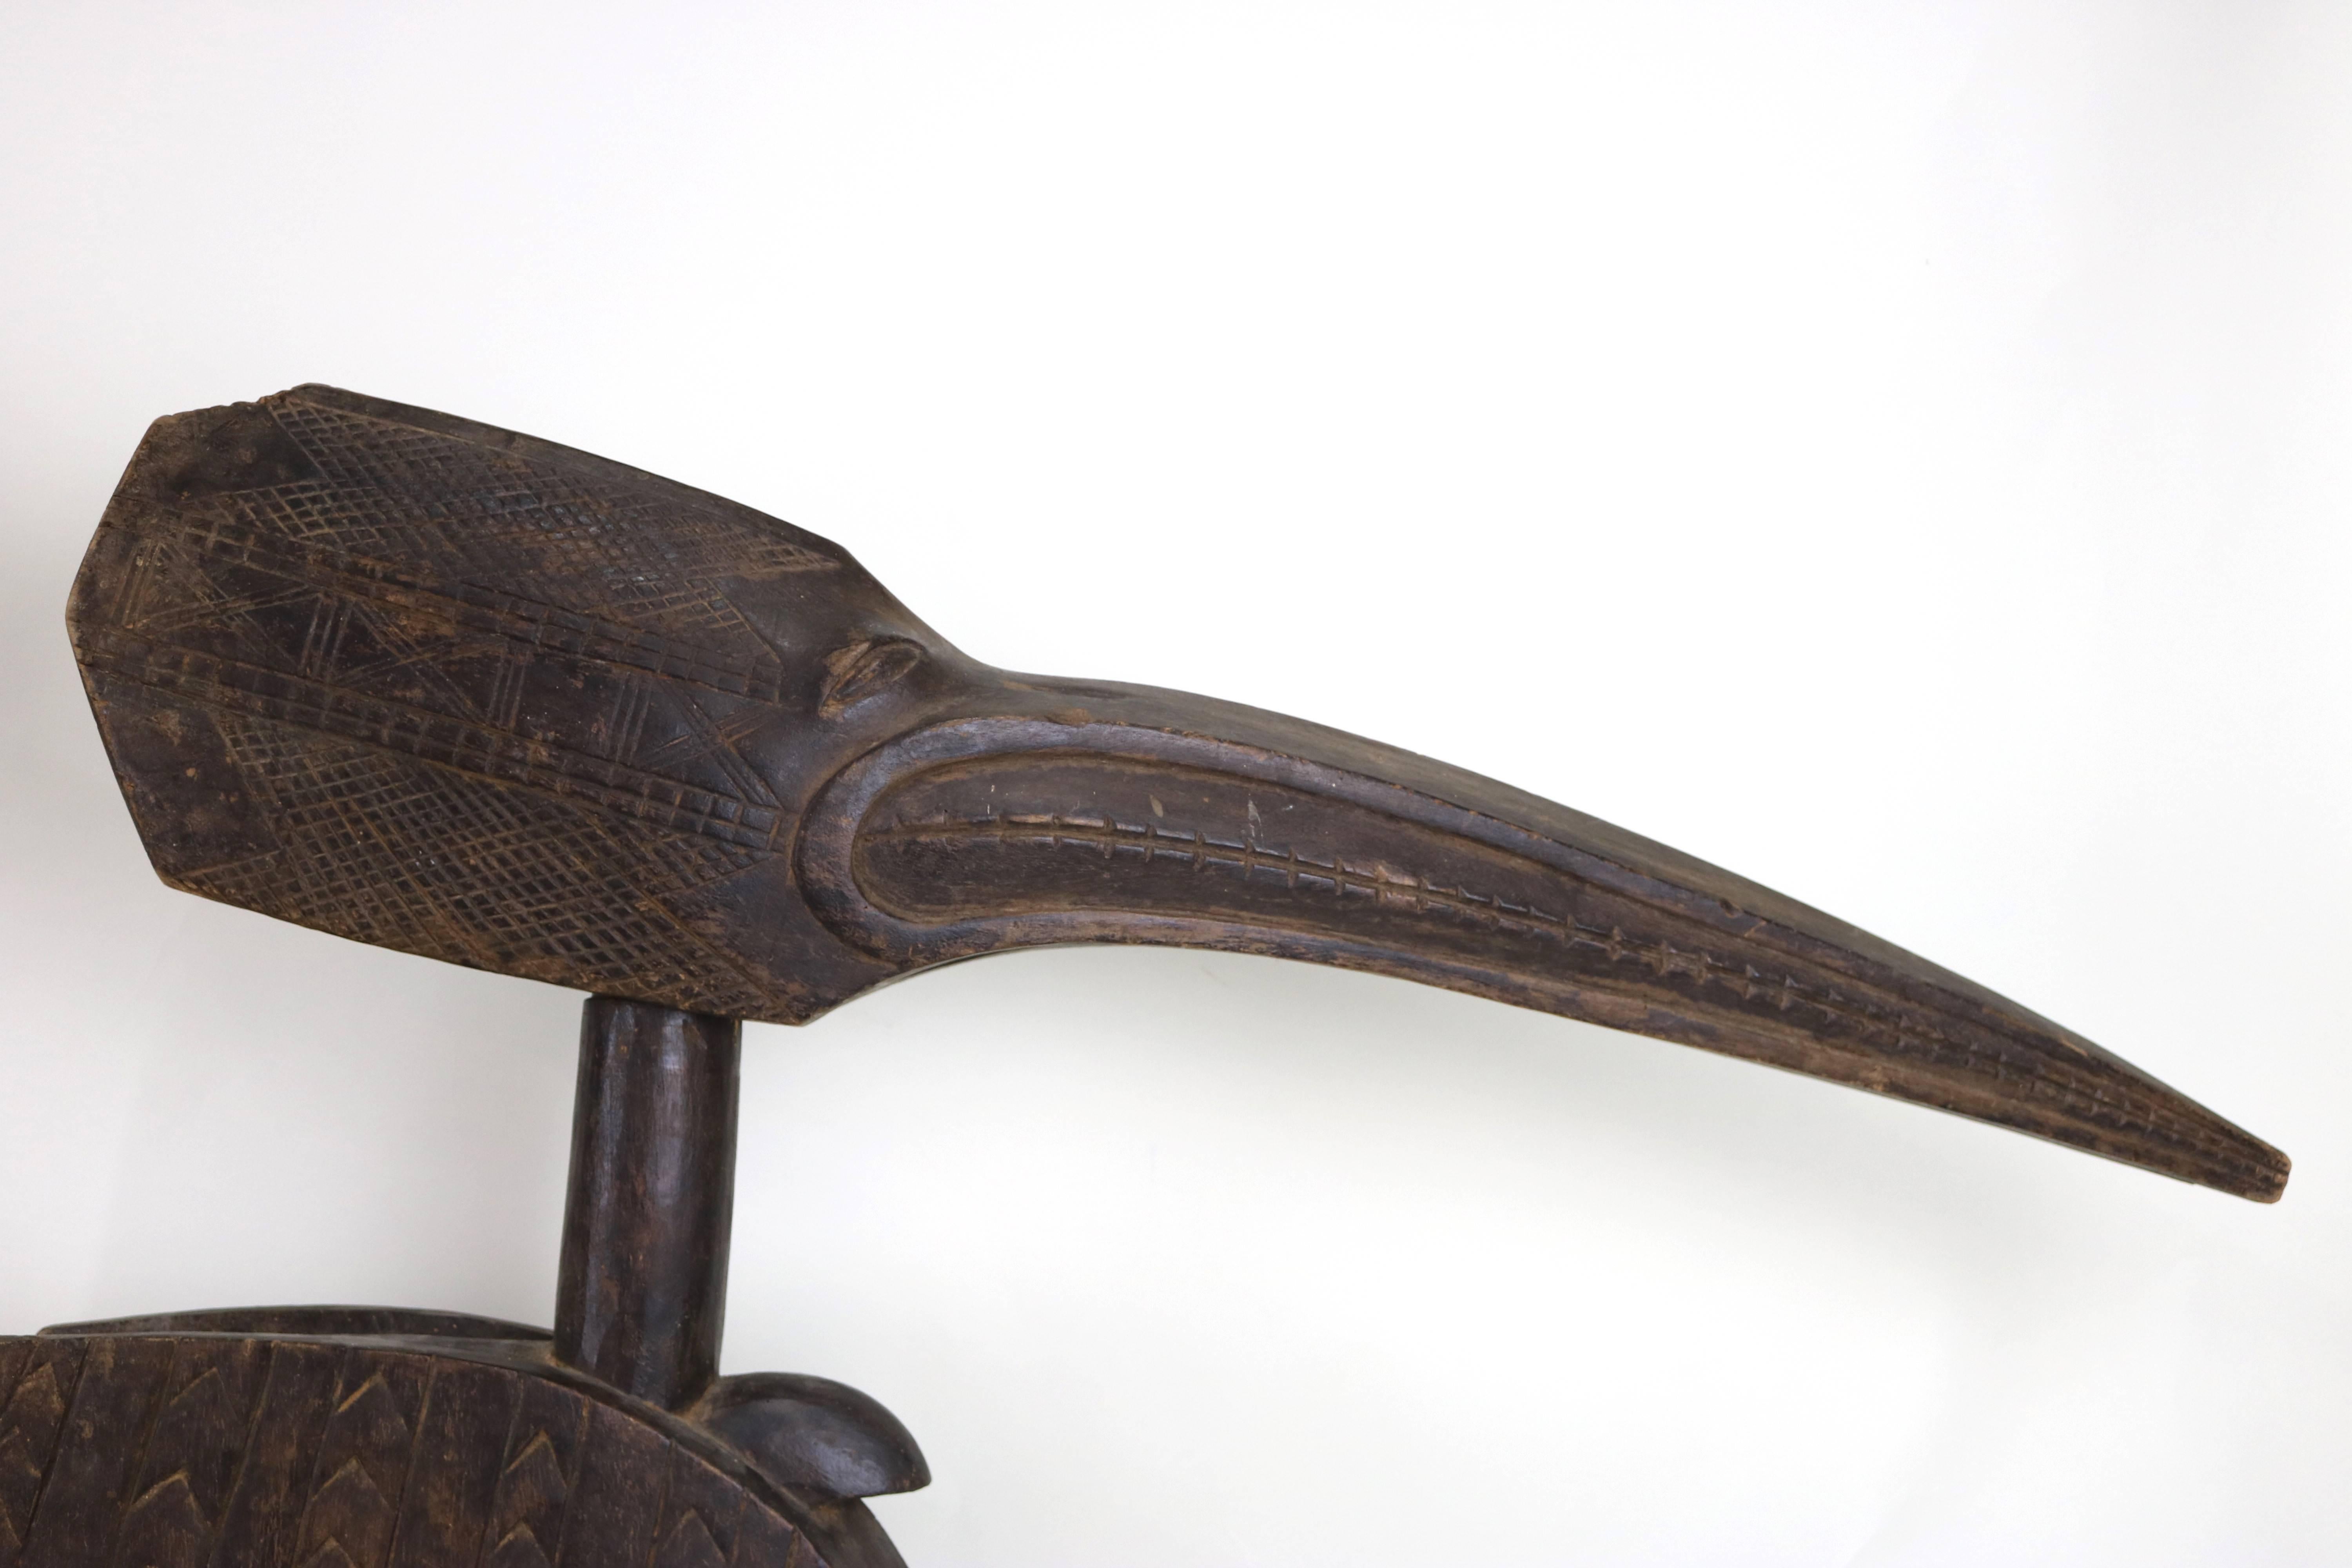 Impressive pair of exotic large intricately carved wood ethnographic bird carved sculptures

A huge Gorgeous statement piece, the adds the 'WoW' factor!